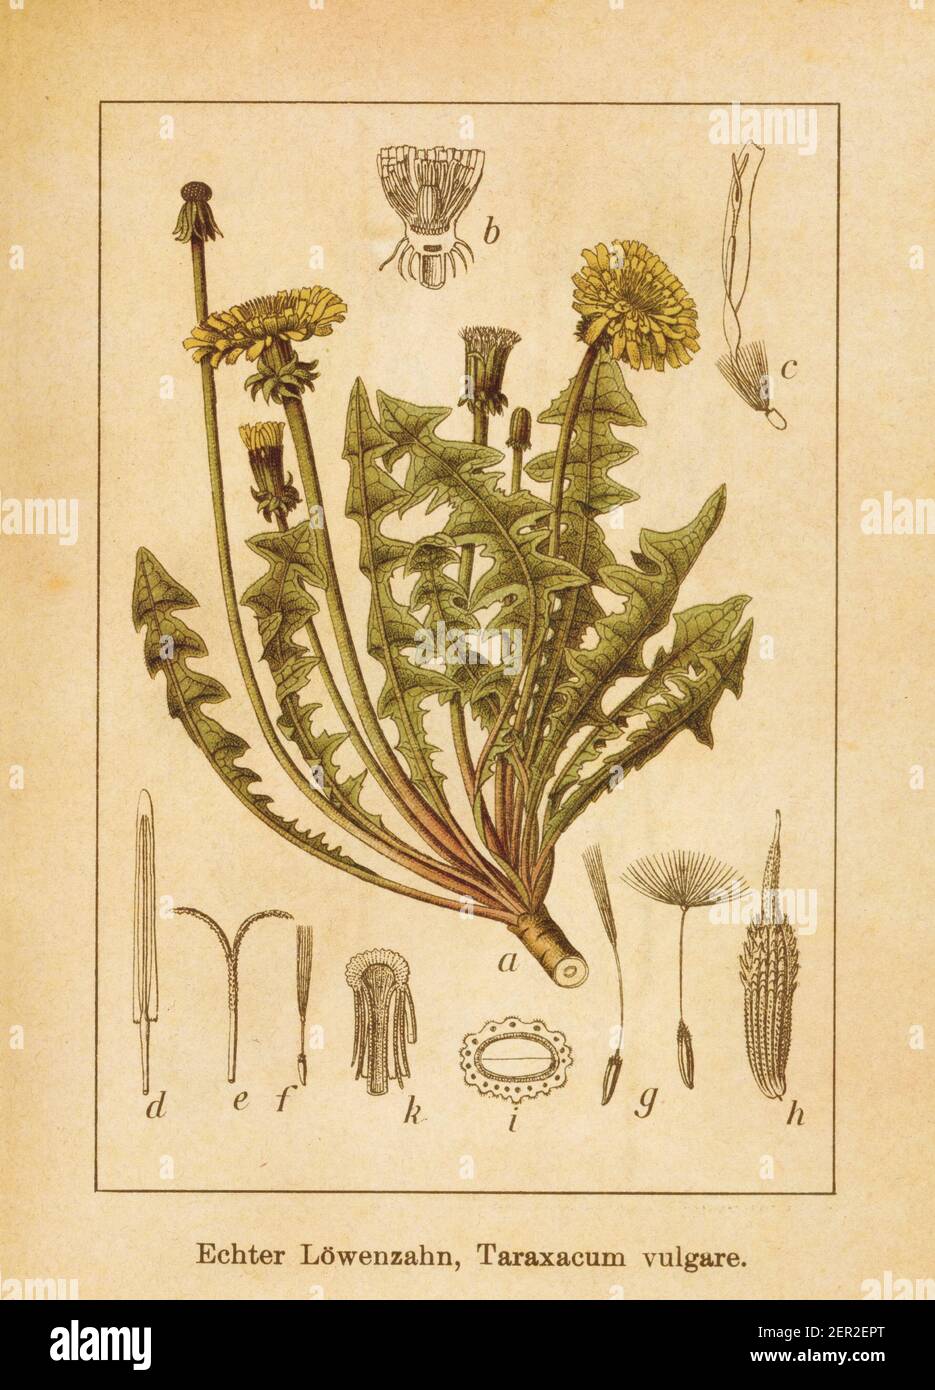 Antique illustration of a taraxacum officinale, also known as taraxacum vulgare or common dandelion. Engraved by Jacob Sturm (1771-1848) and published Stock Photo